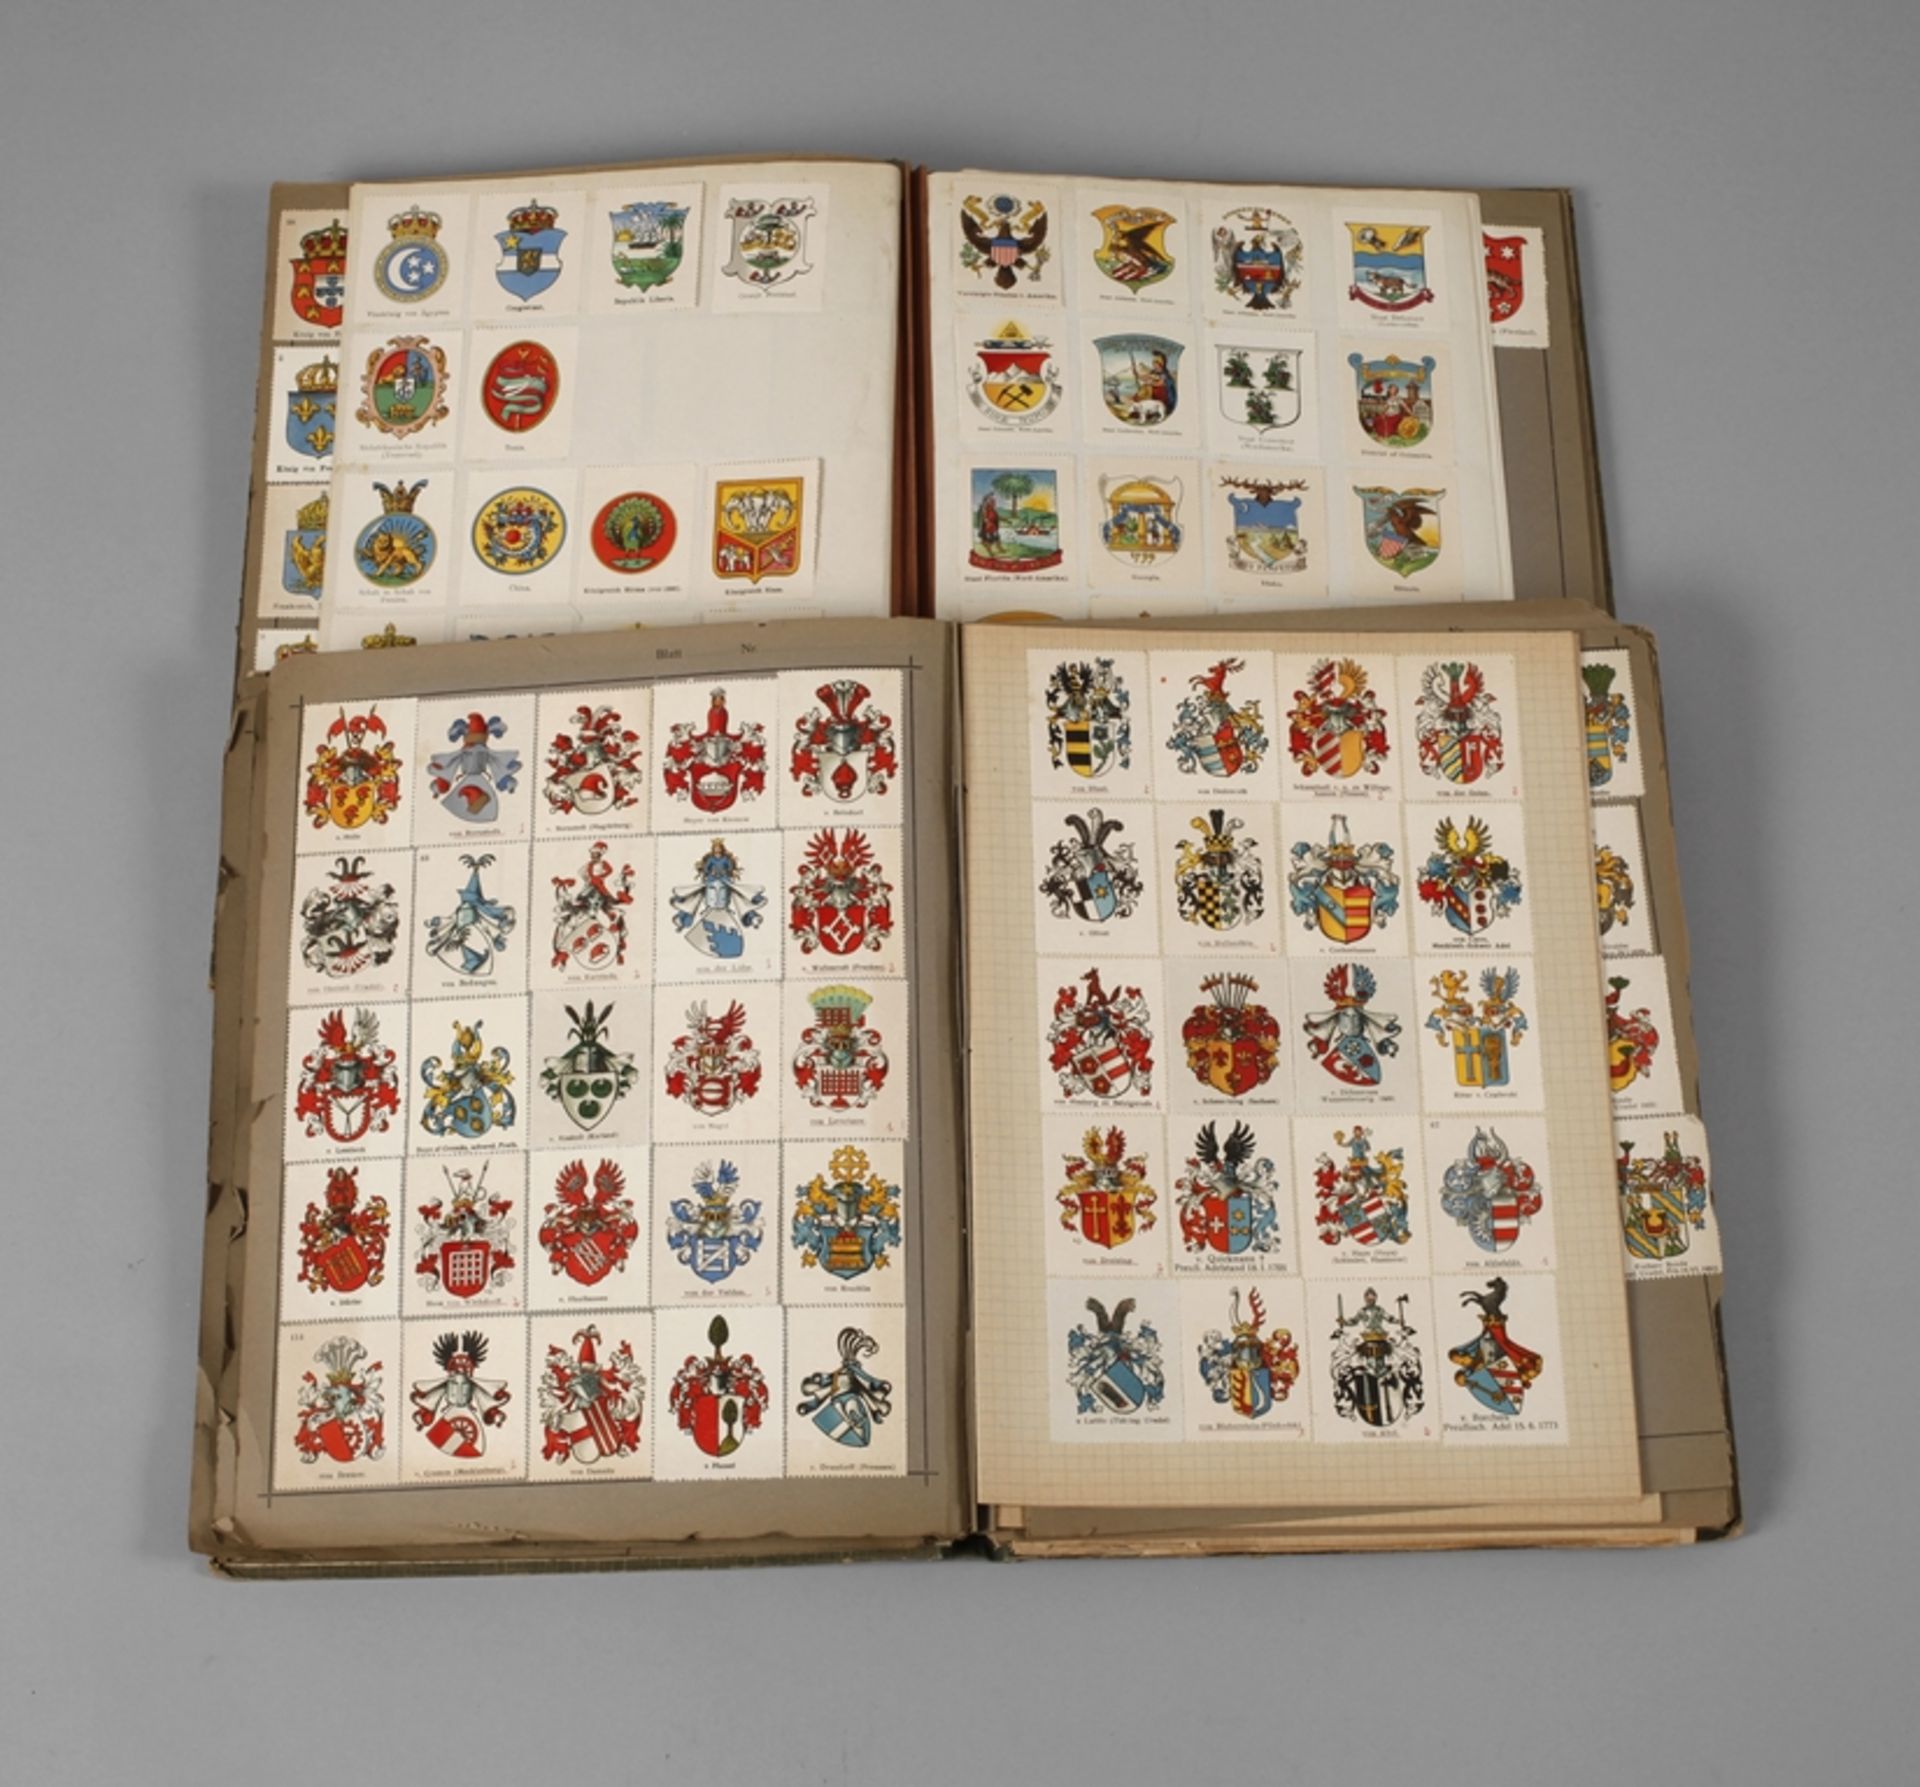 Collection of coats of arms